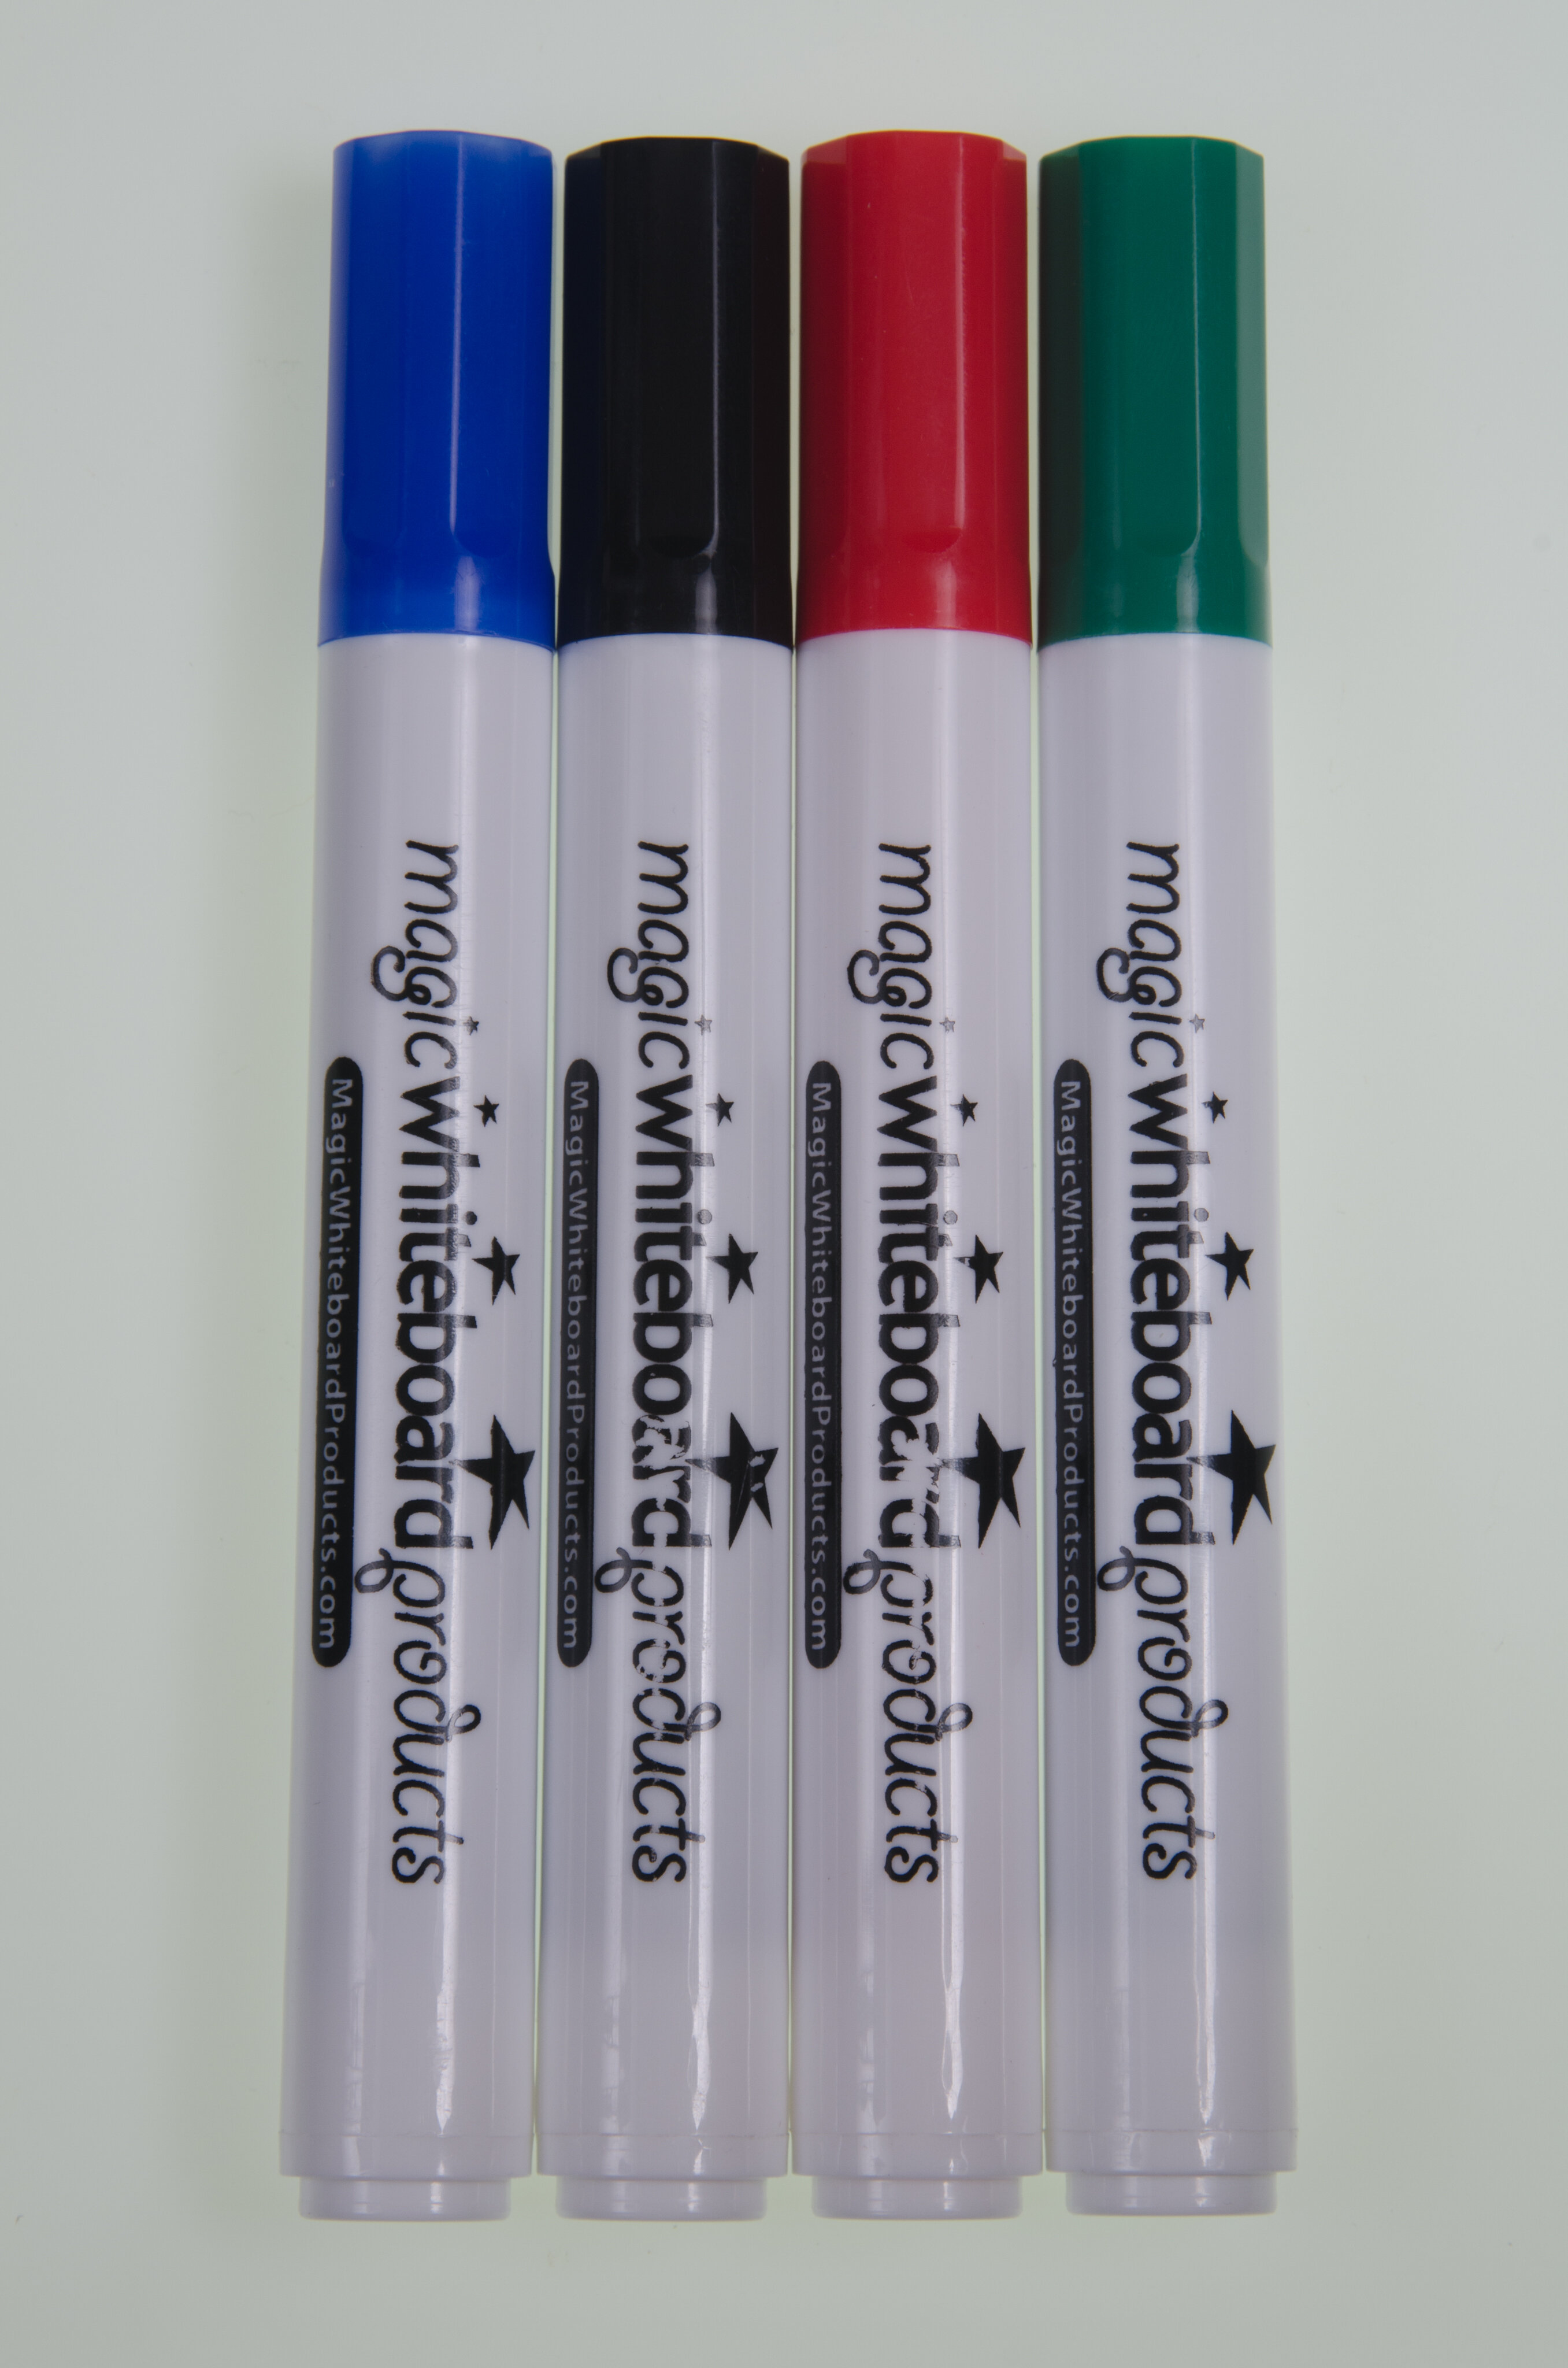  Dri Mark Dry Erase Markers, Bullet Tip, 12 Count